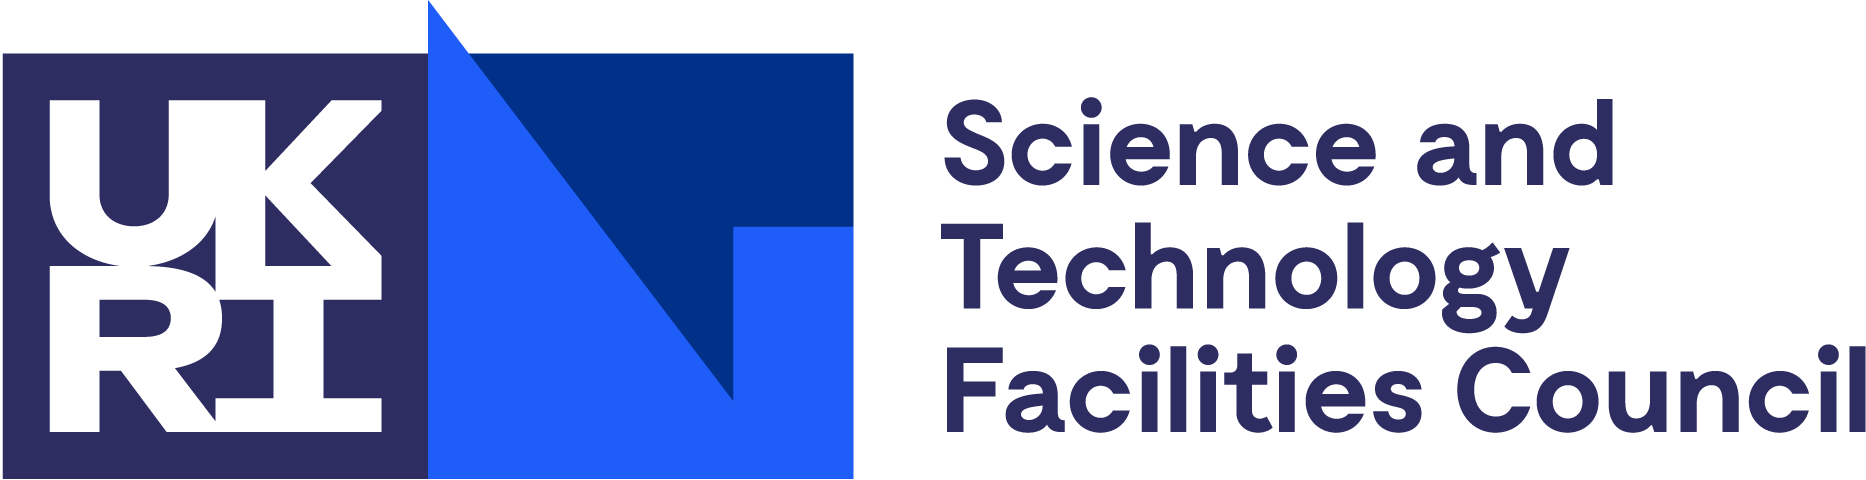 The logo of the Science and Technology Facilities Council